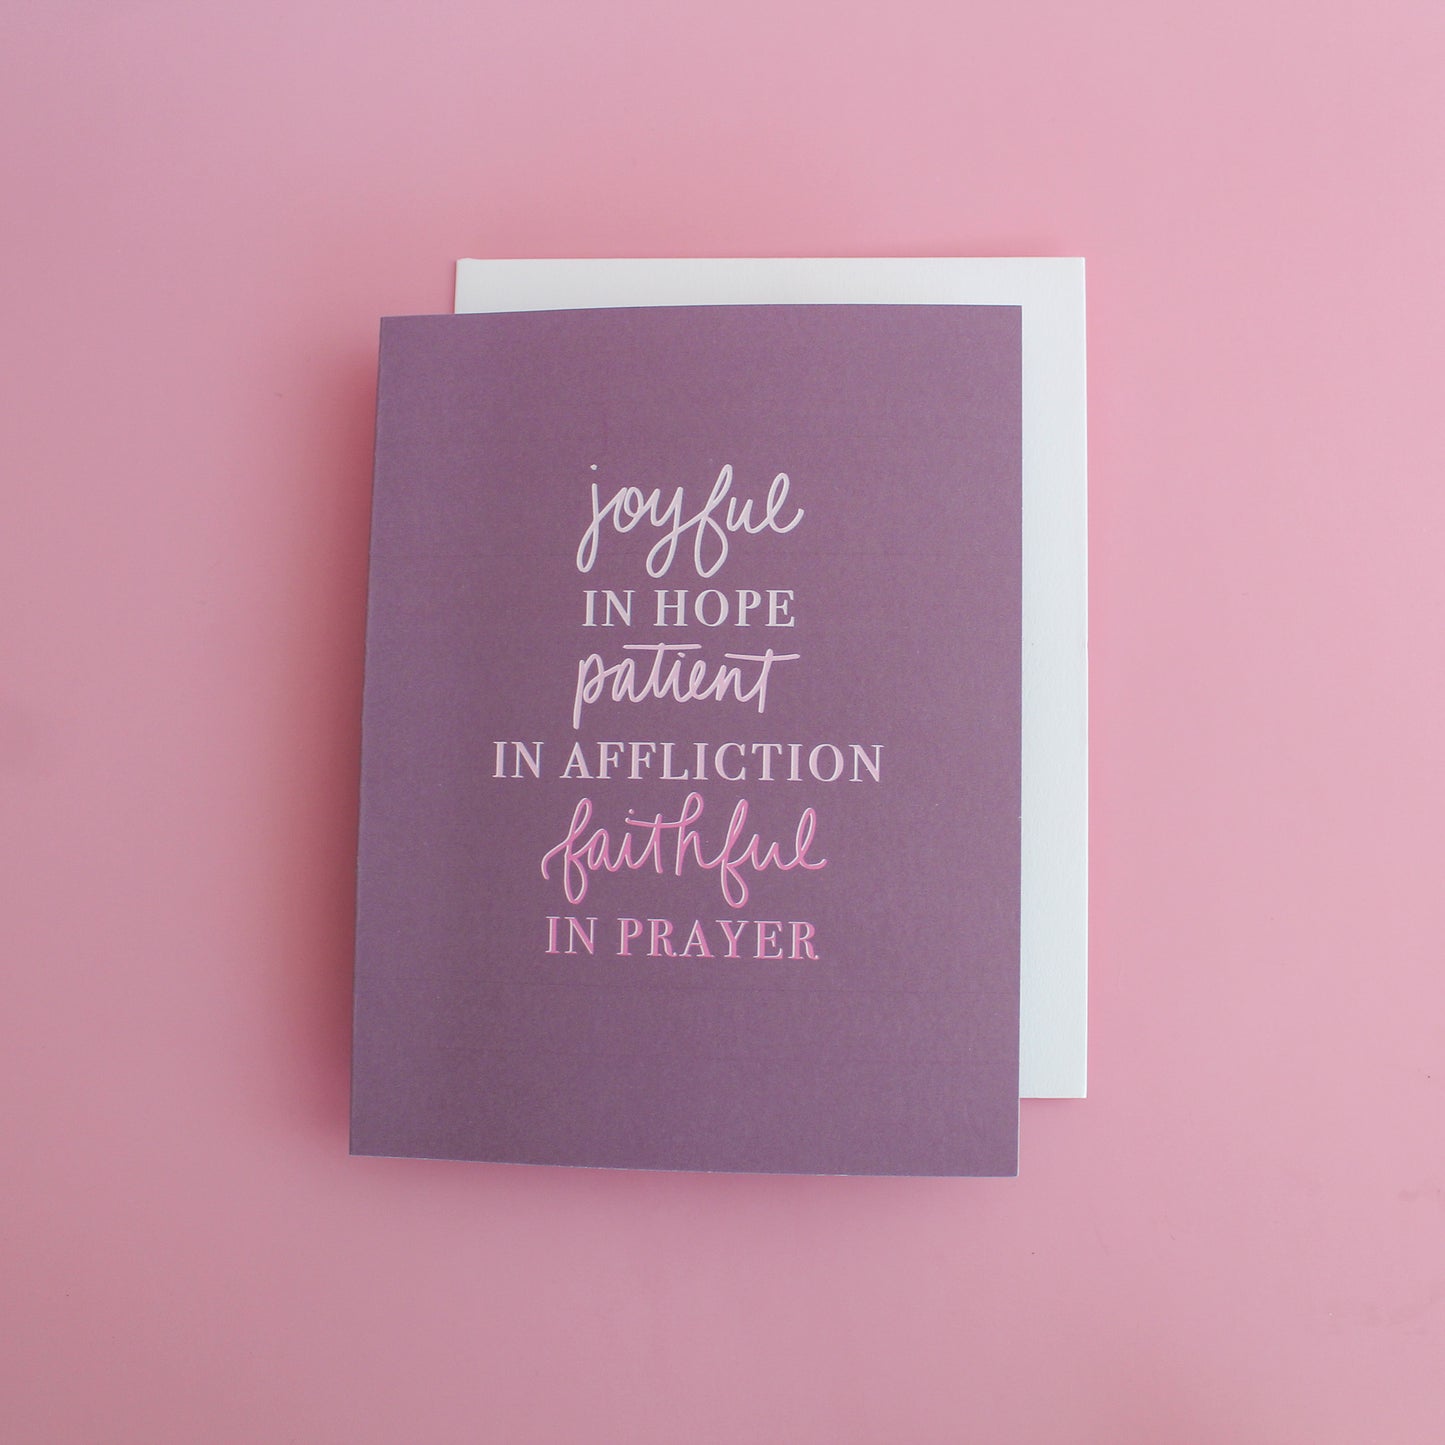 Joyful in Hope, Patient in Affliction, Faithful in Prayer Greeting Card | Life Motto Collection, christian greeting card, bible verse greeting card, inspirational greeting card, easter, baptism, confirmation, religious greeting card, life motto greeting card, motivational greeting card